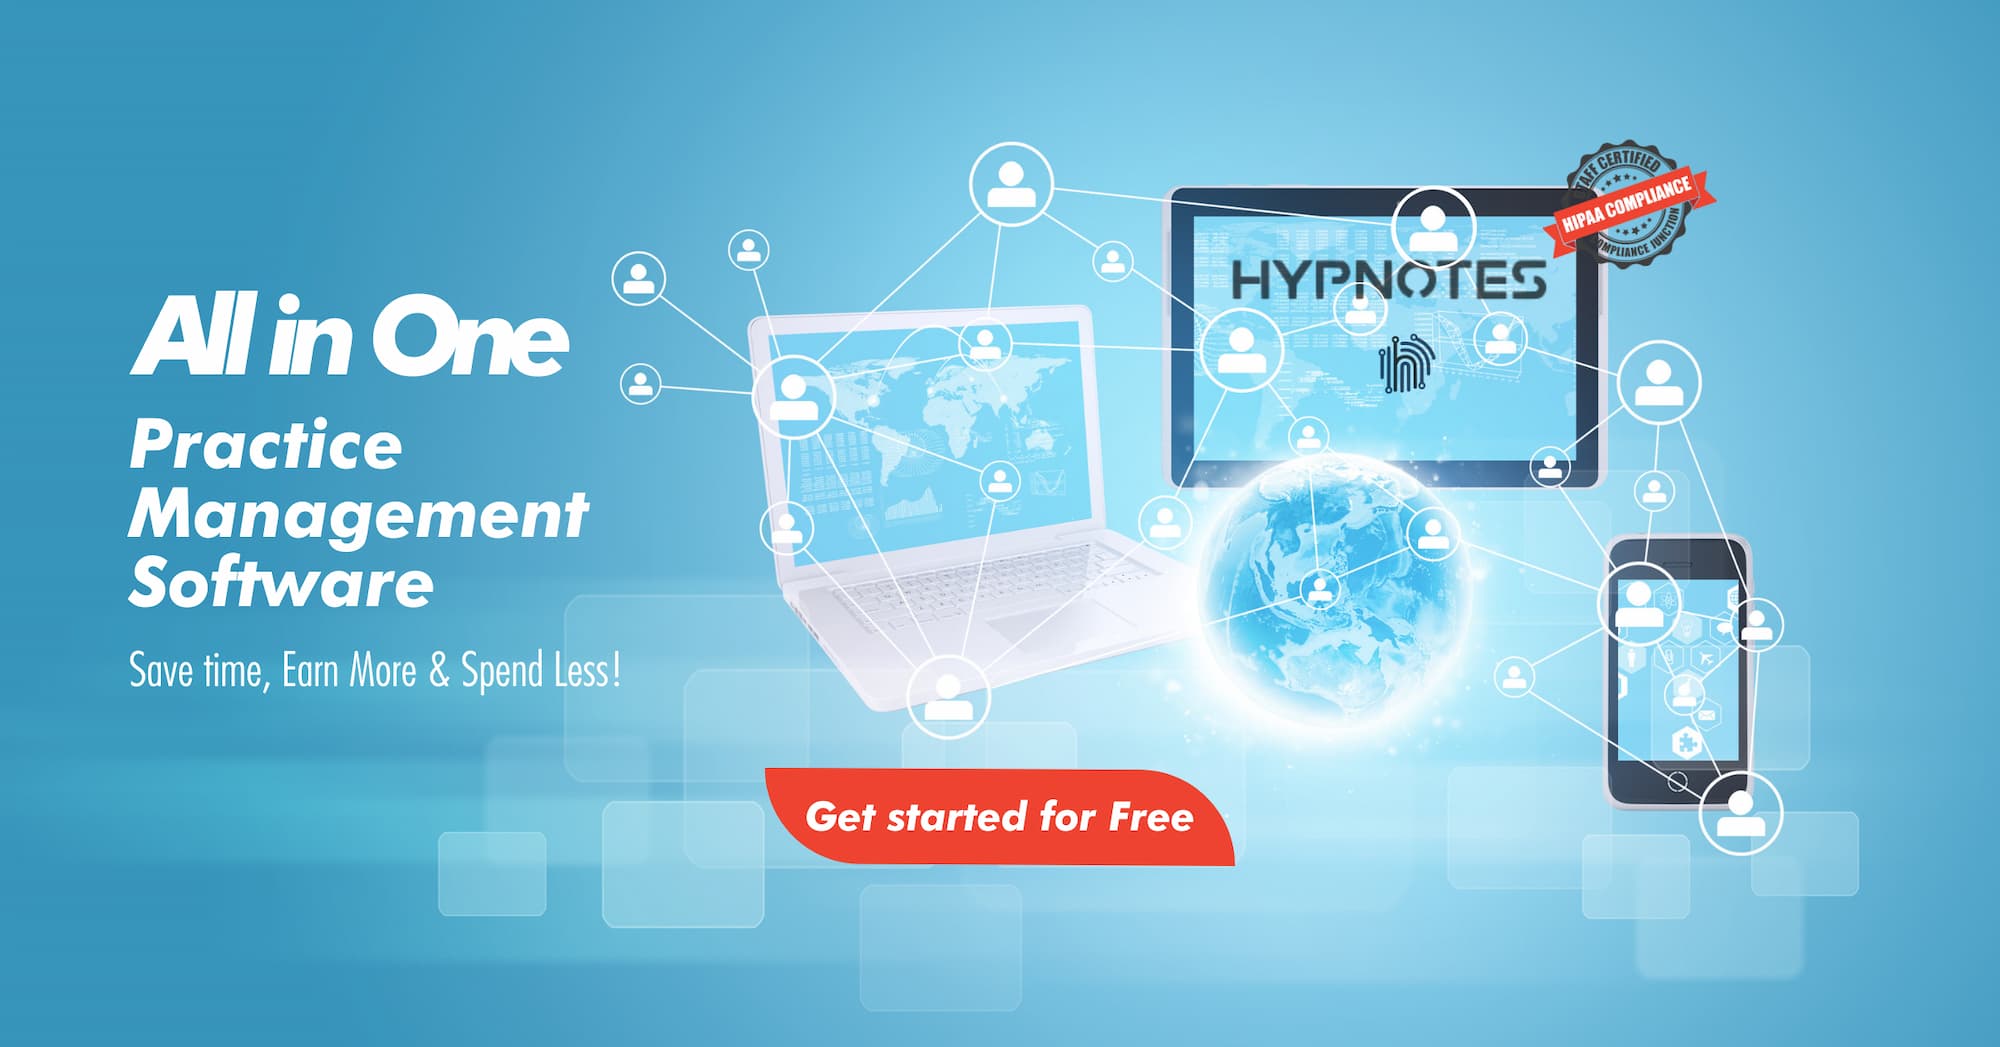 Hypnotes all in one medical practice management software, hipaa compliant software image